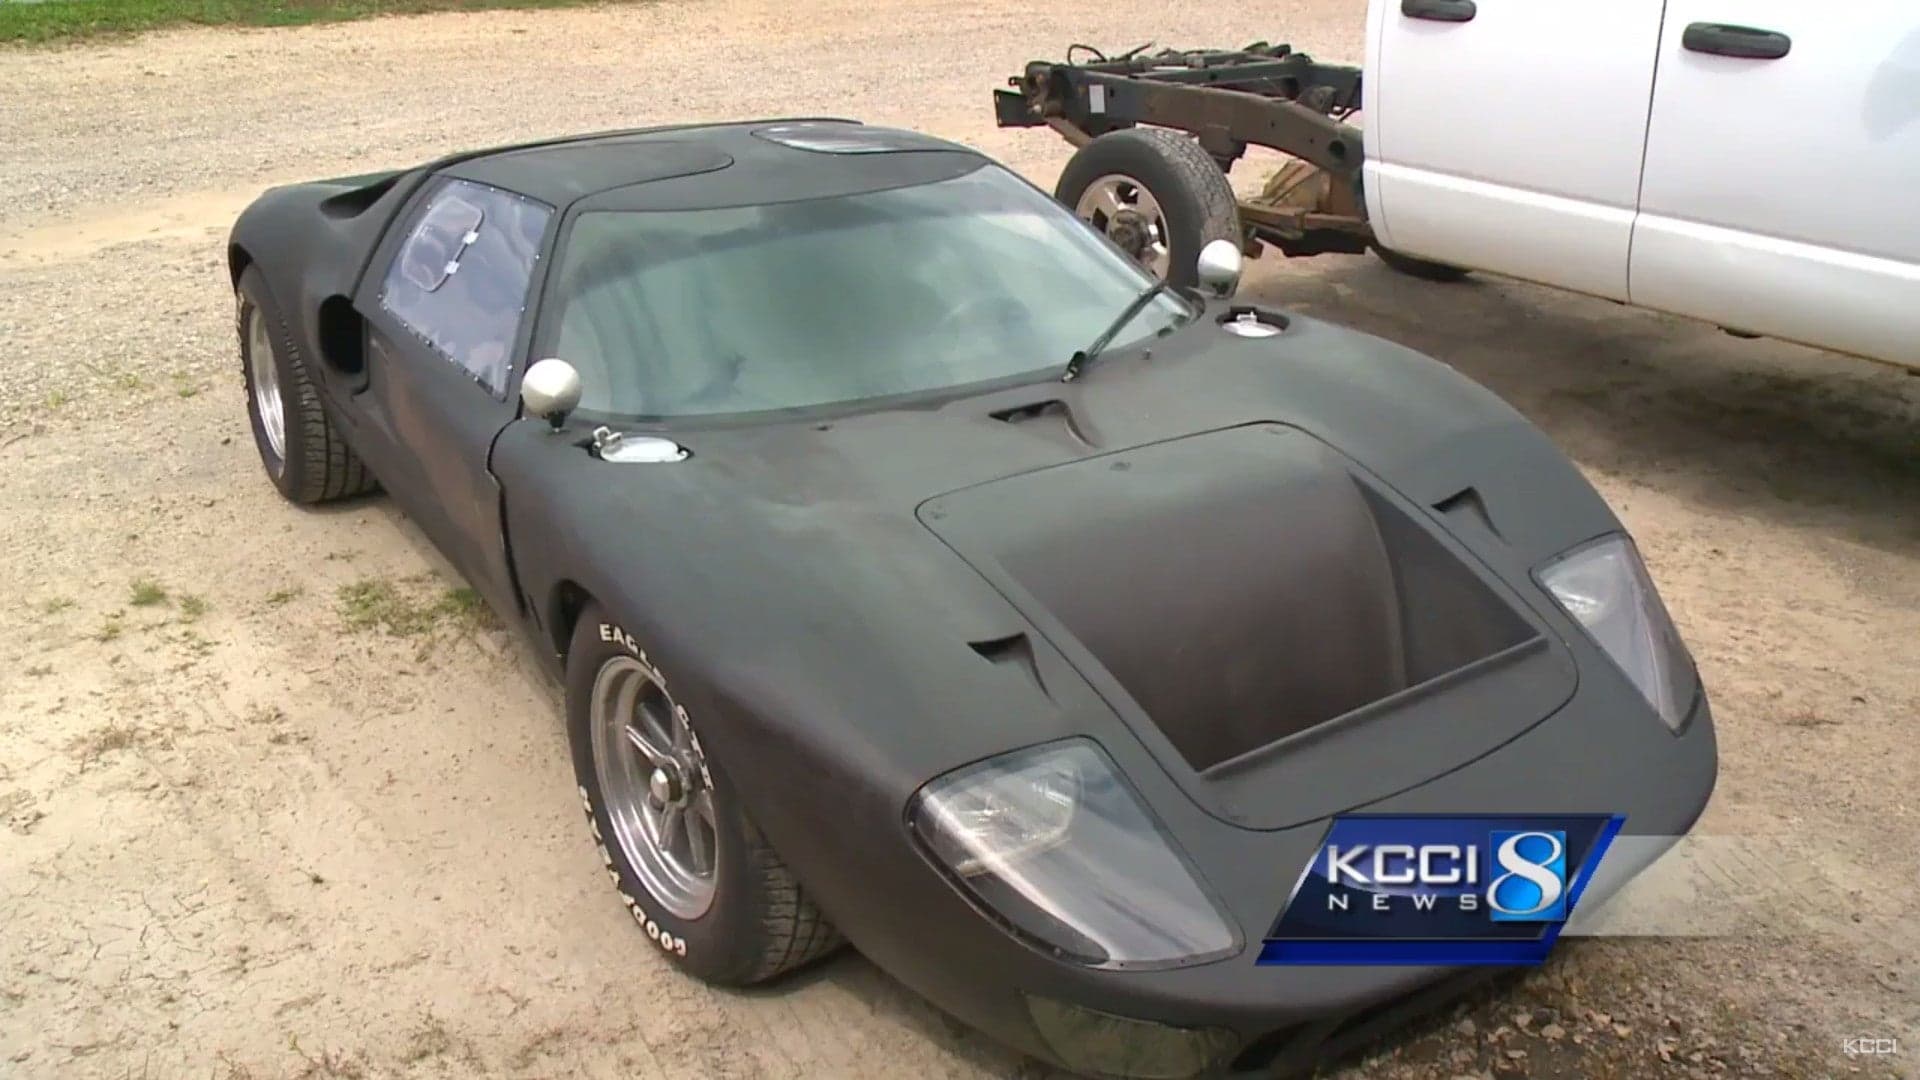 Thief’s Terrible Paint Job Fails to Stop Cops from Finding Stolen Ford GT40 Replica